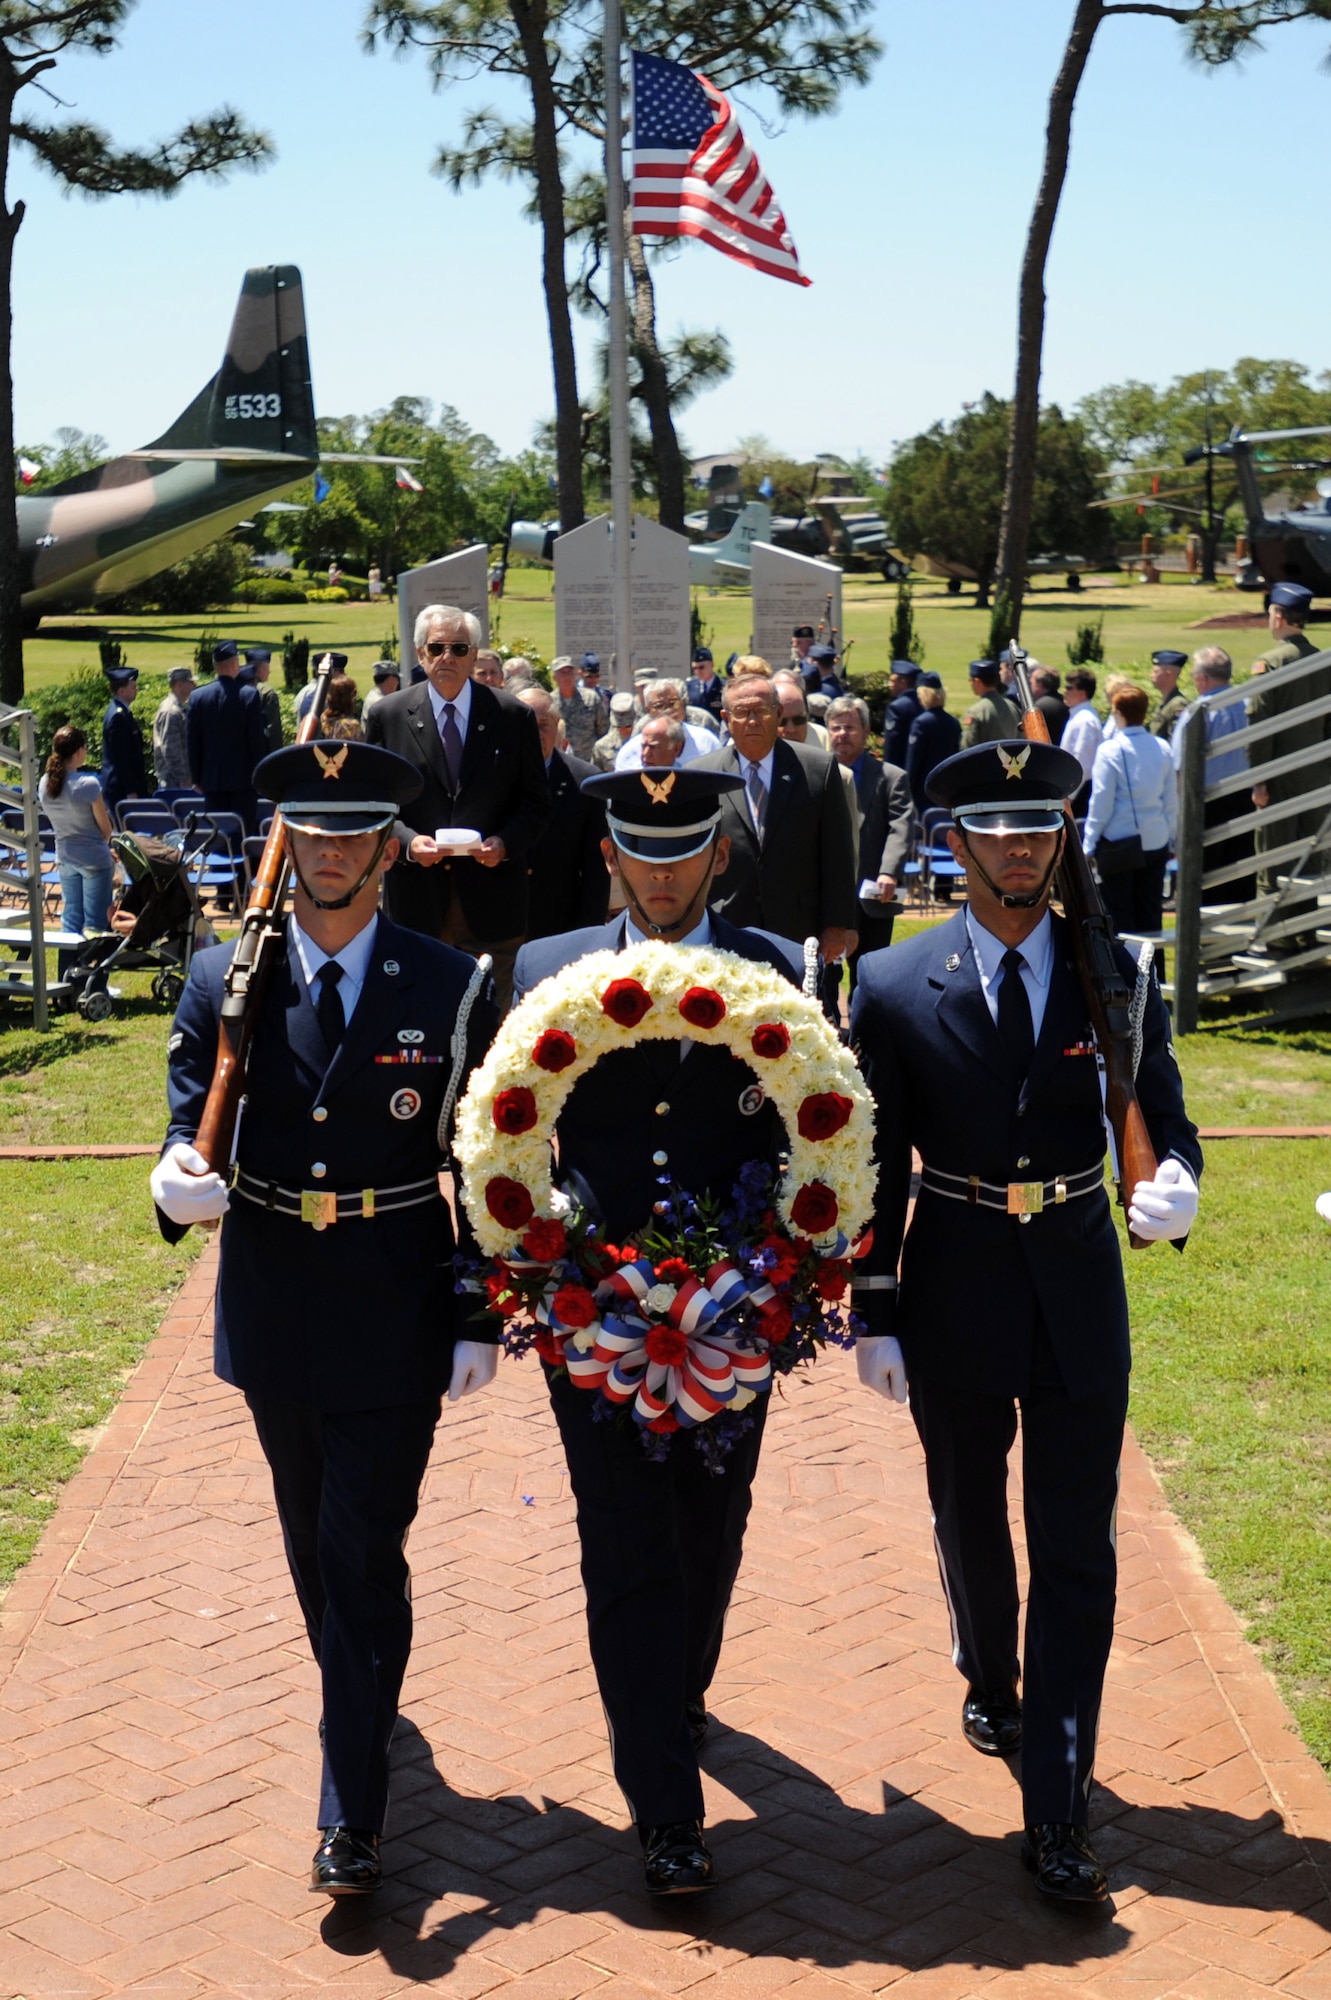 Members of the Hurlburt Honor Guard lead attendees of the Operation Eagle Claw memorial ceremony April 29. Operation Eagle Claw, conducted April 24, 1980, was a complex mission to rescue U.S. citizens taken hostage in the U.S. embassy in Iran.  Tragically, the attempt ended in the death of eight service members, including five from Hurlburt Field’s 1st Special Operations Wing. (DoD photo by U.S. Air Force Senior Airman Matthew Loken)